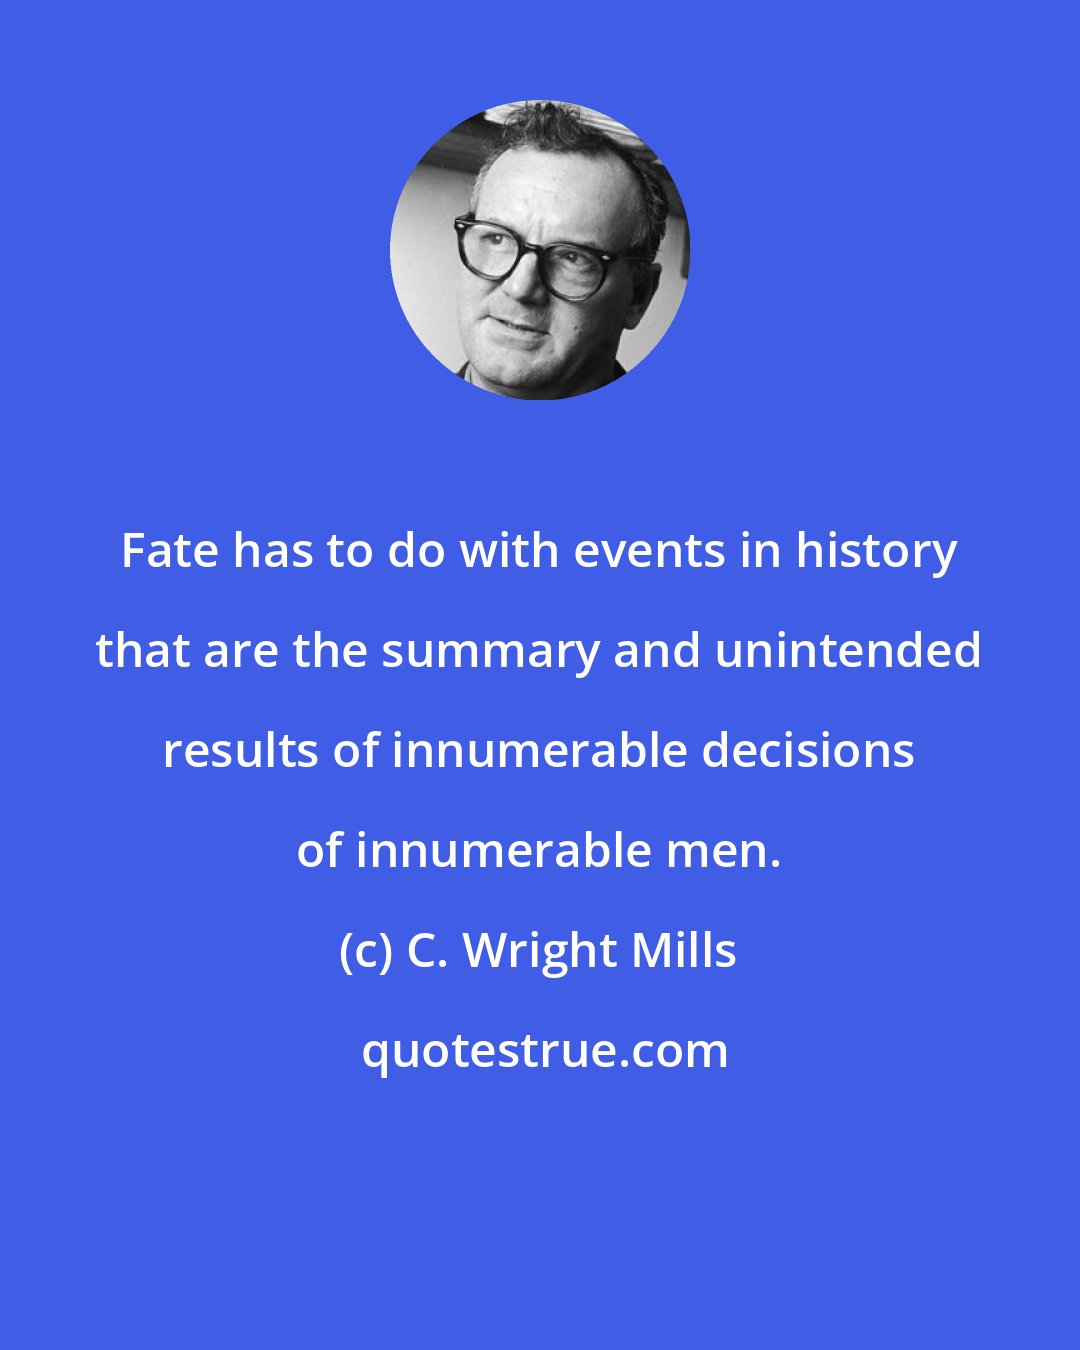 C. Wright Mills: Fate has to do with events in history that are the summary and unintended results of innumerable decisions of innumerable men.